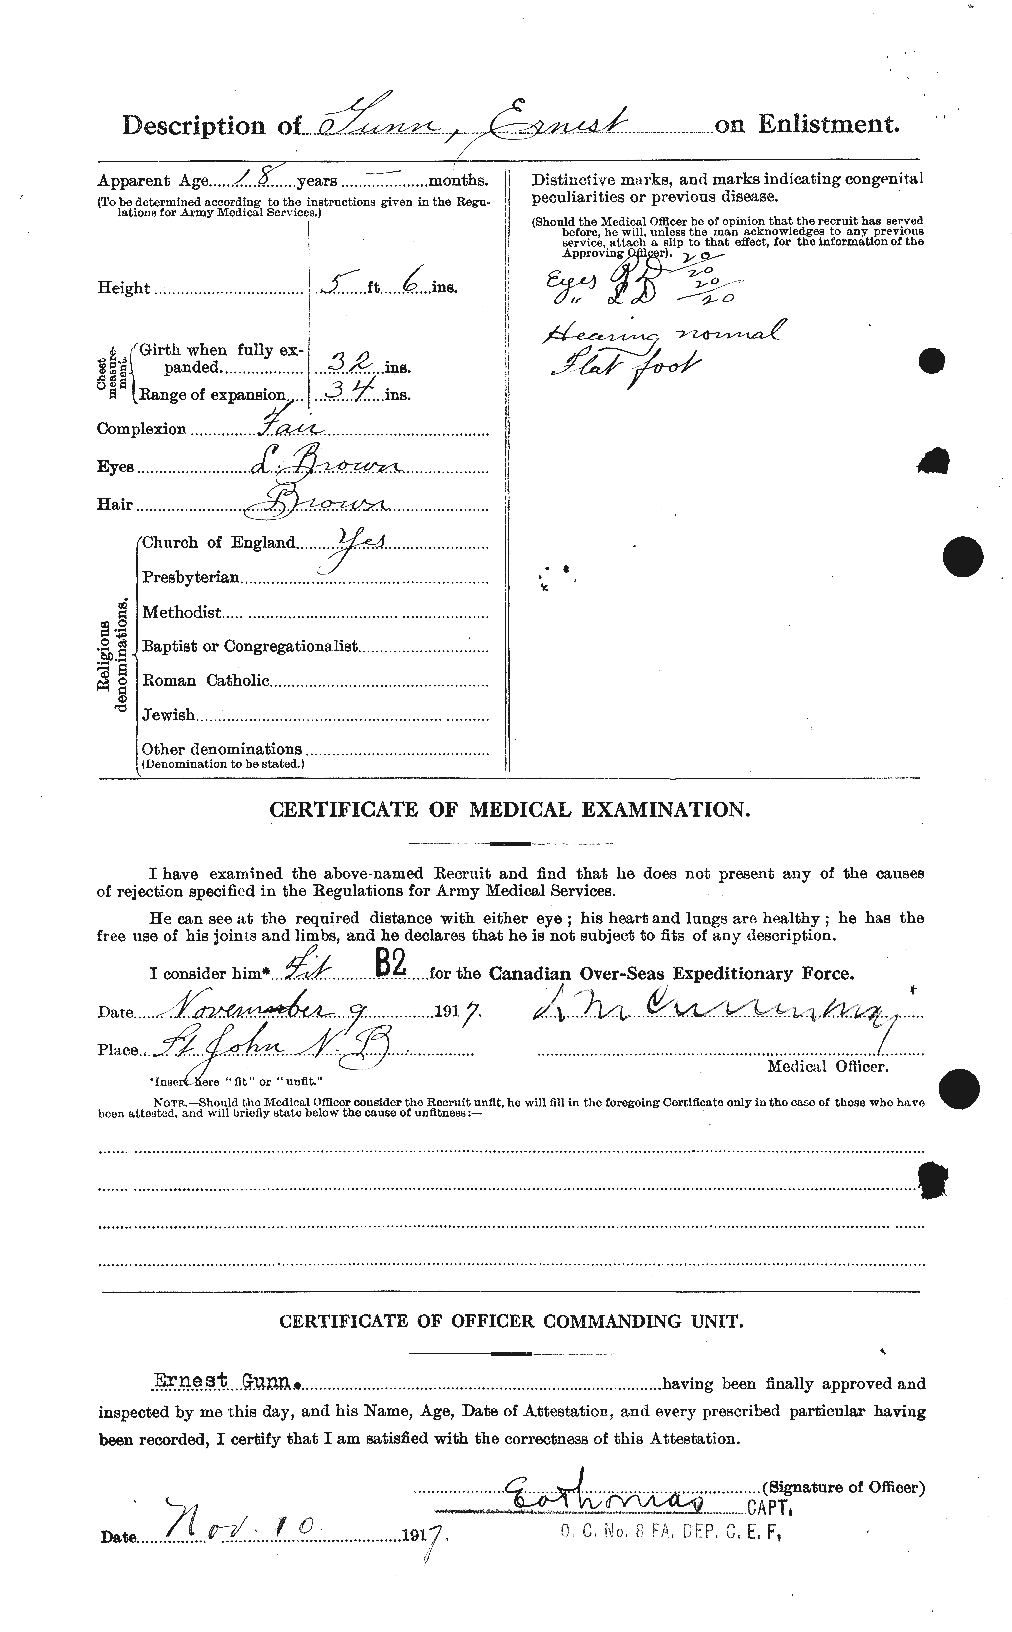 Personnel Records of the First World War - CEF 368038b